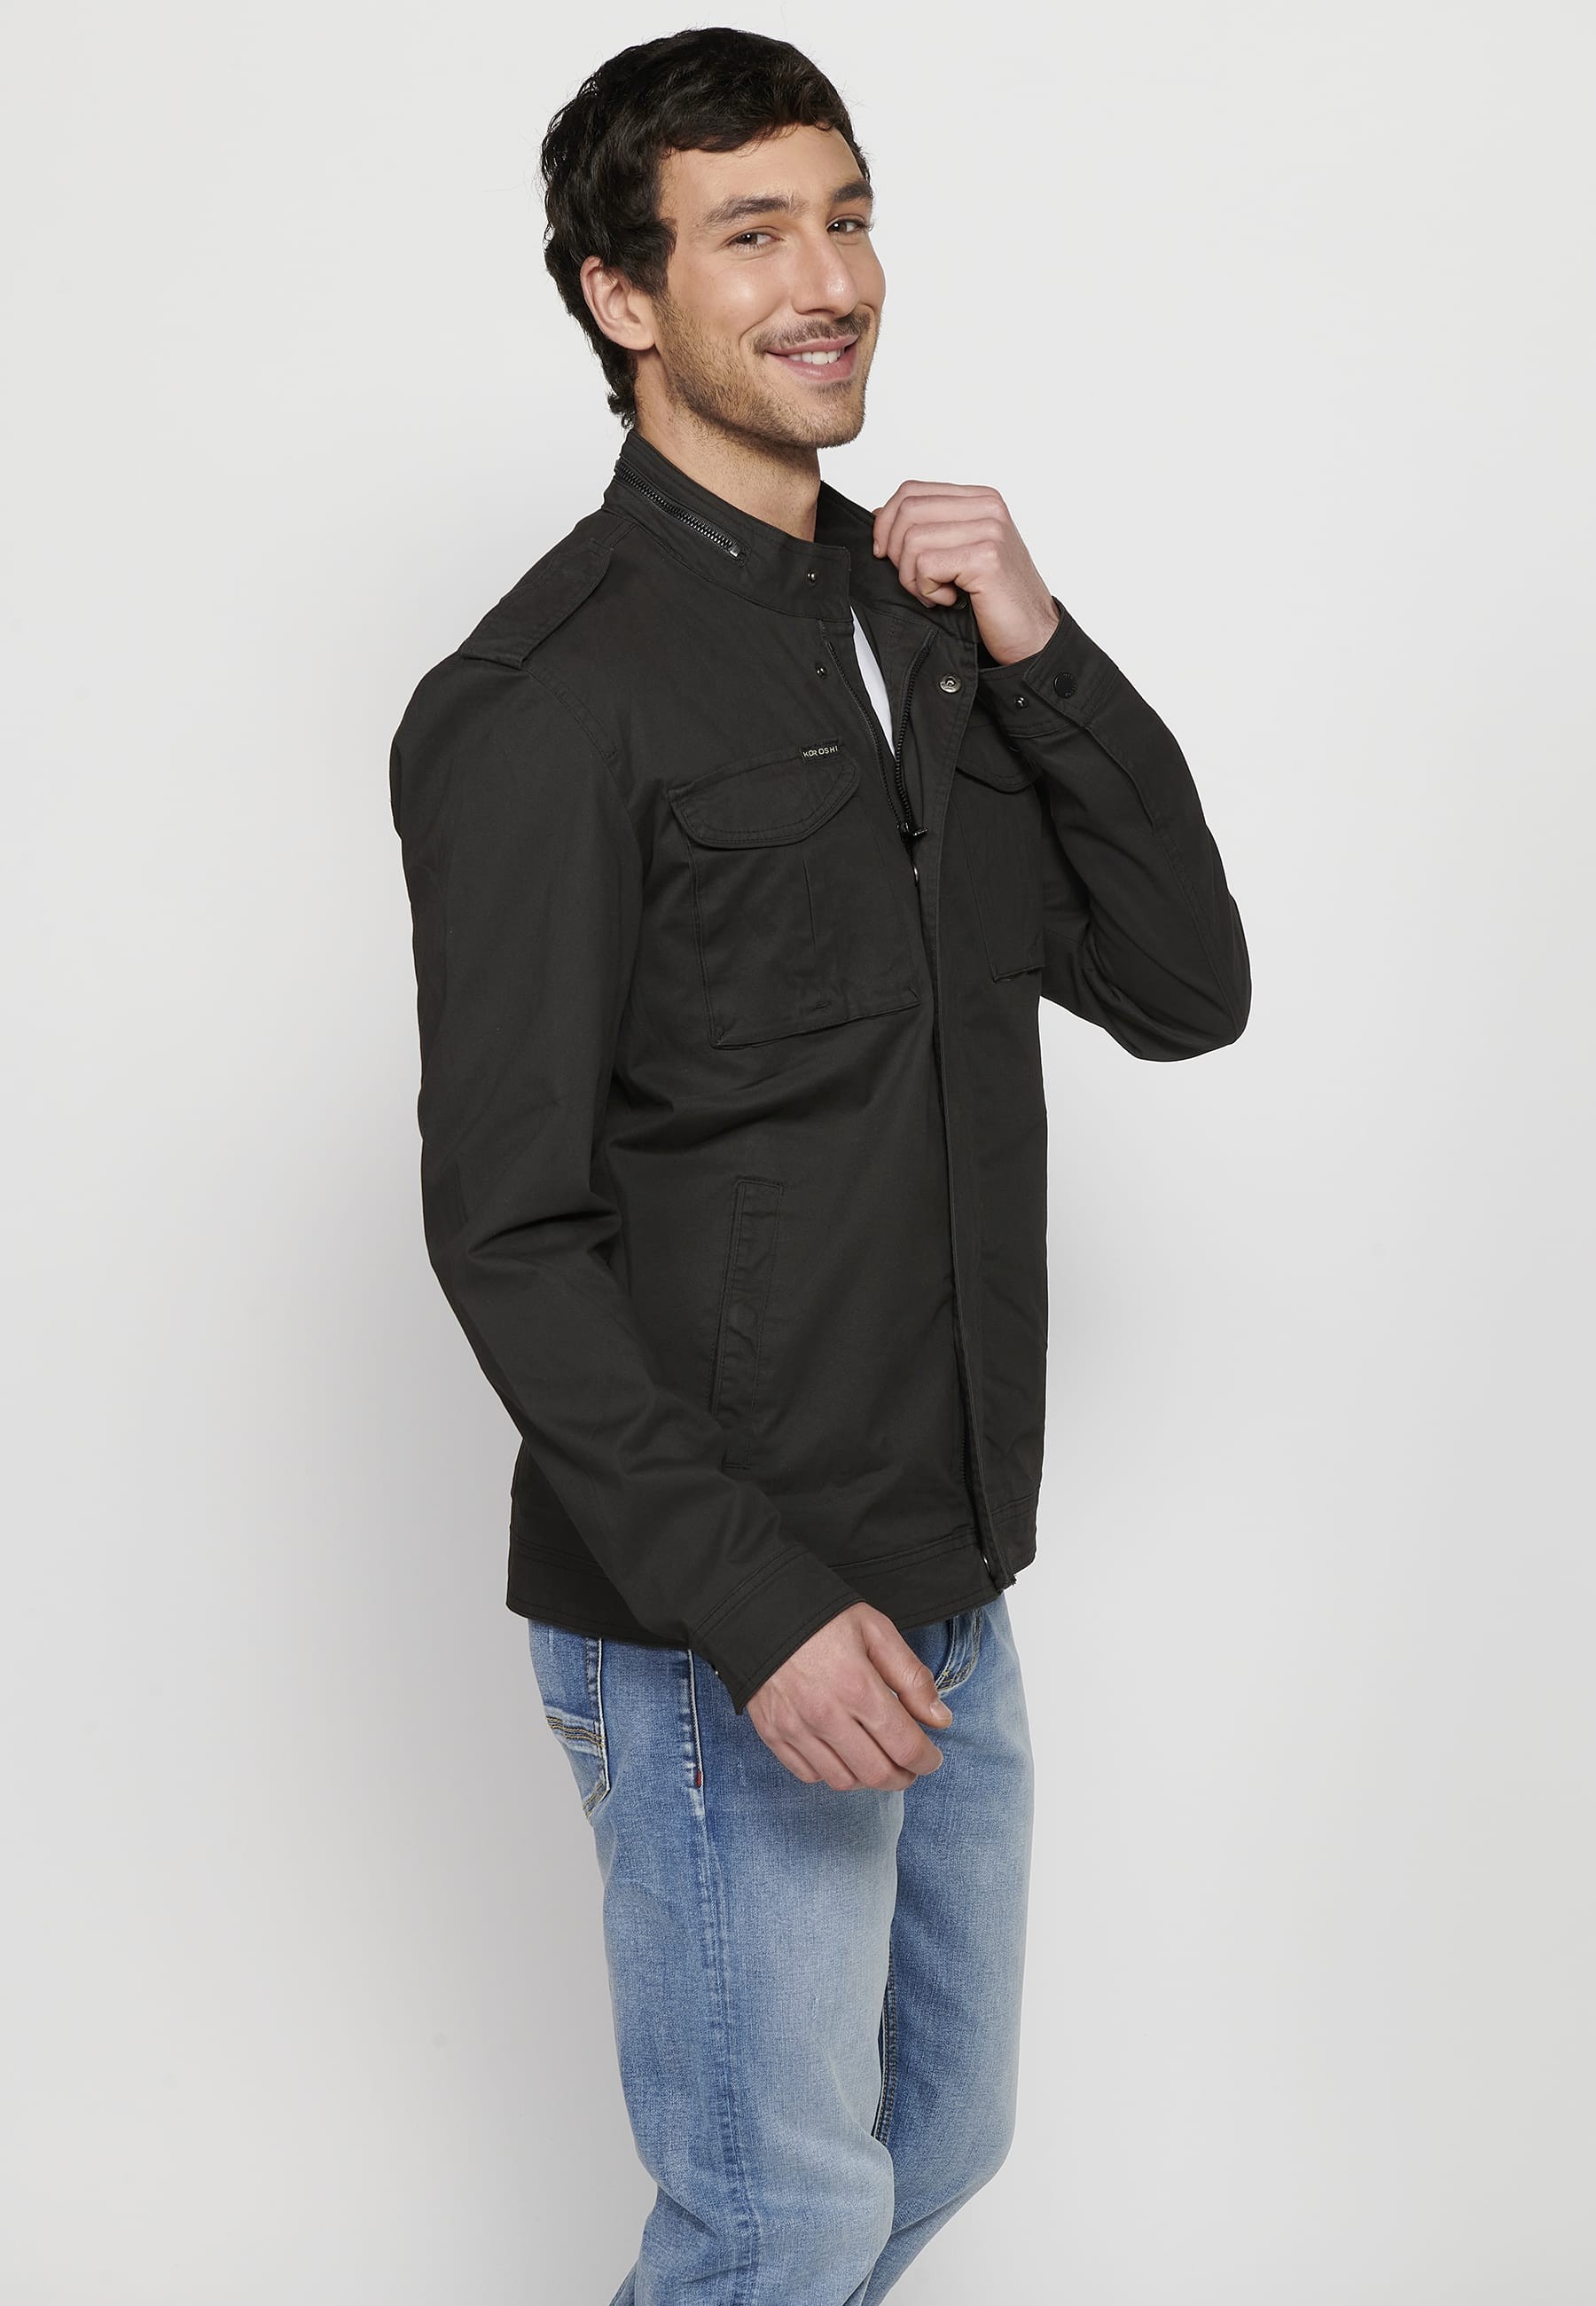 Long-sleeved jacket with high collar and front zipper closure with pockets in black for men. 5